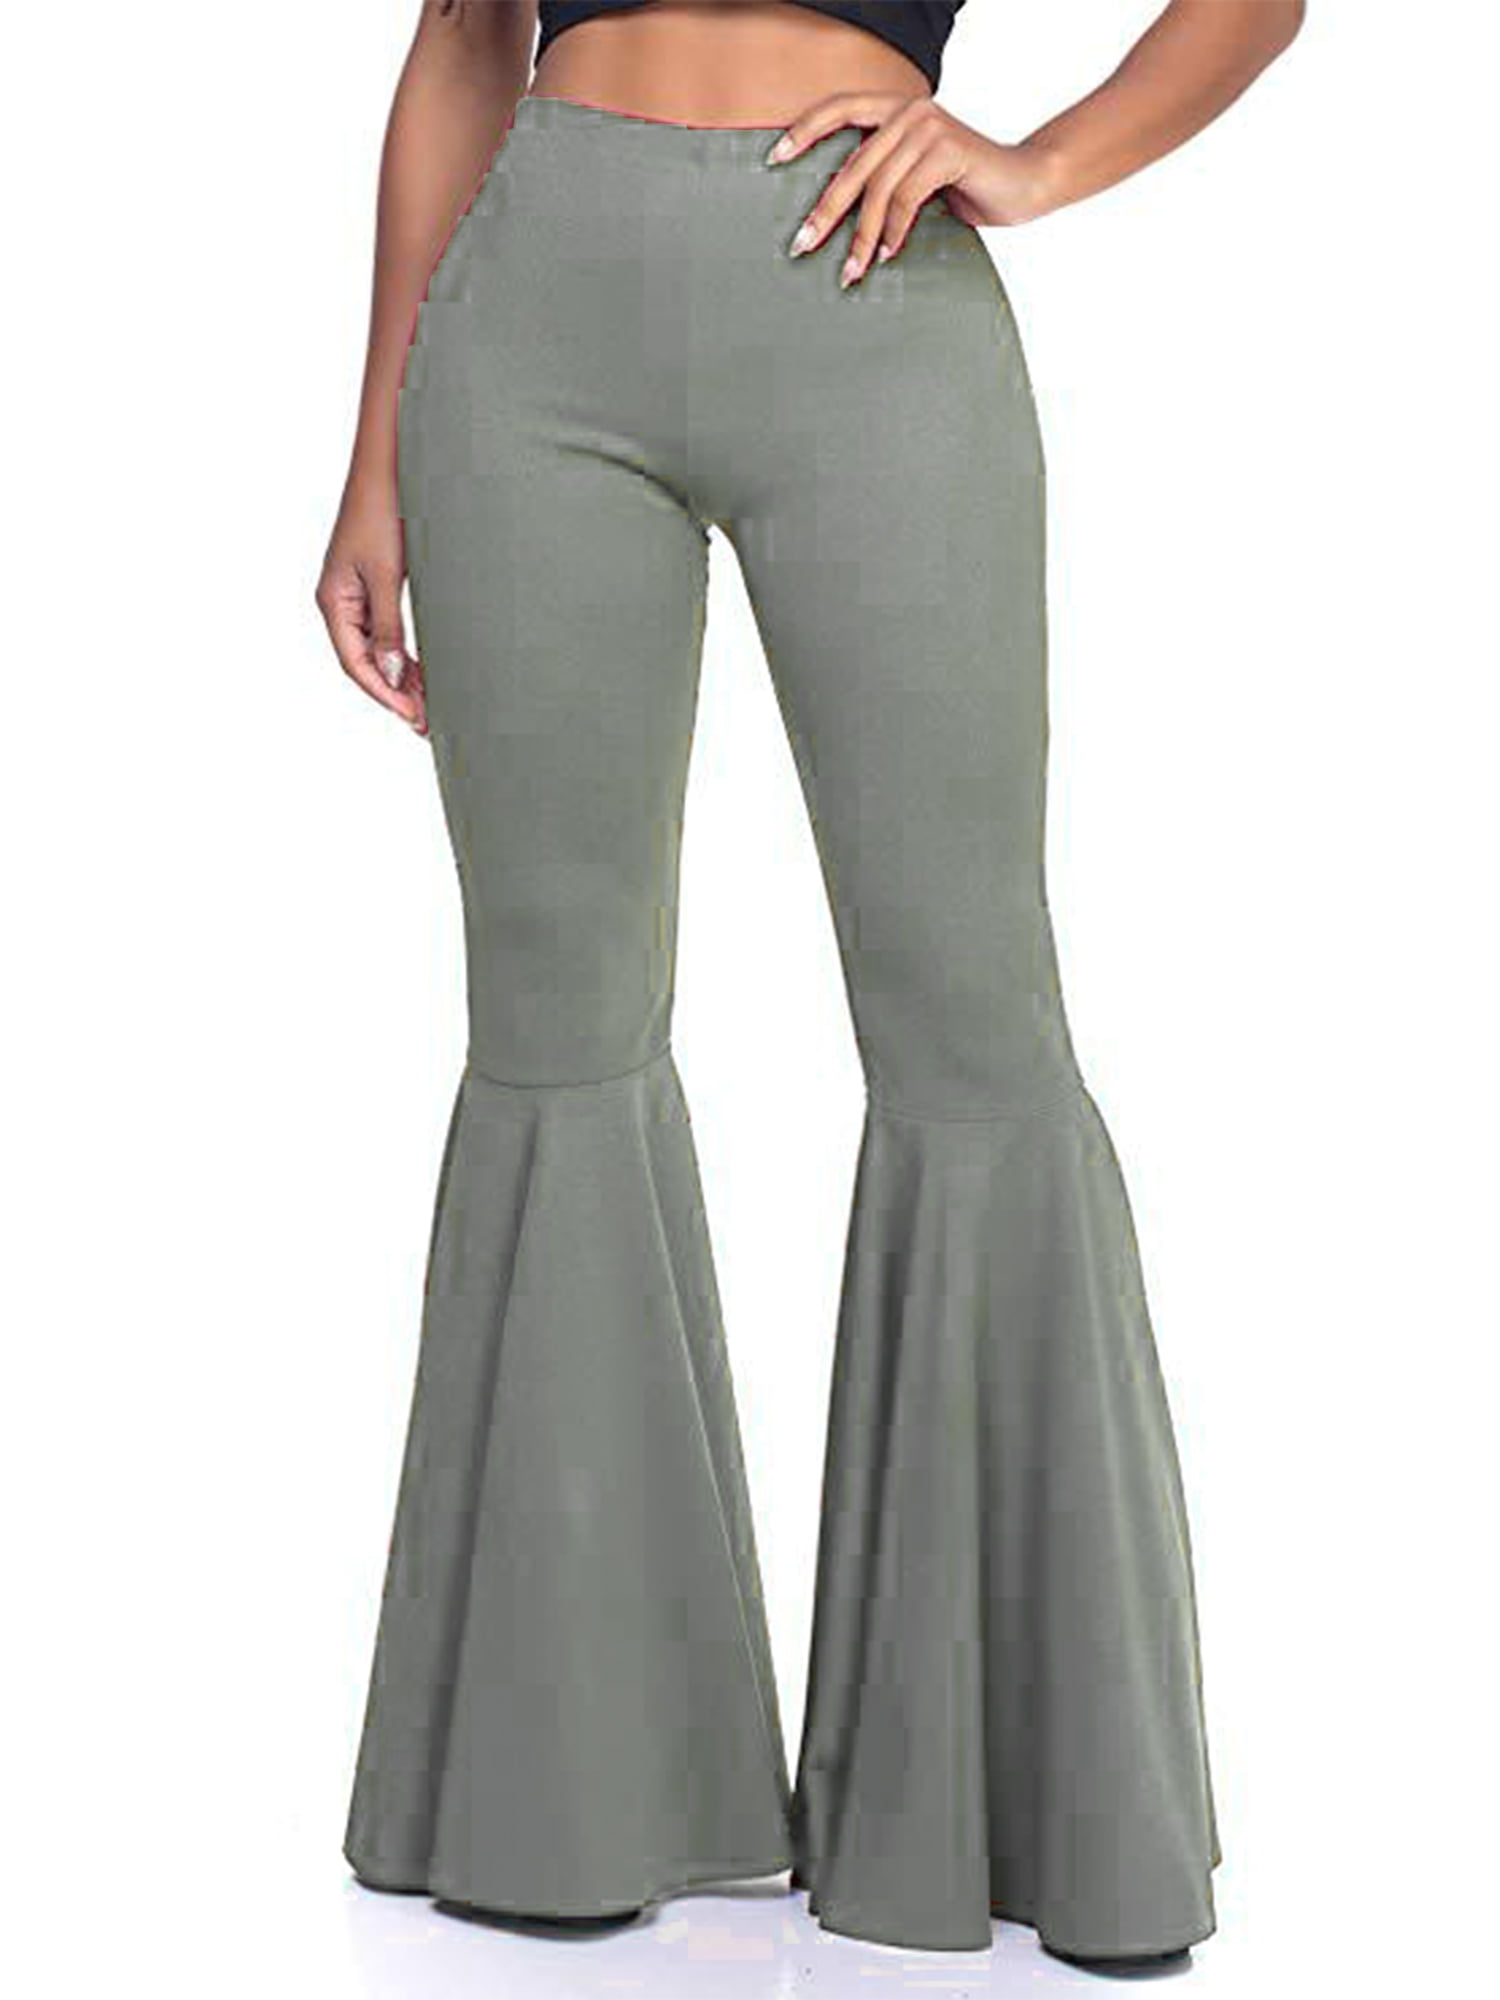 Women Casual Mid Waist Stretchy Bell-Bottom Long Trousers Loose Flare Dance Pant 